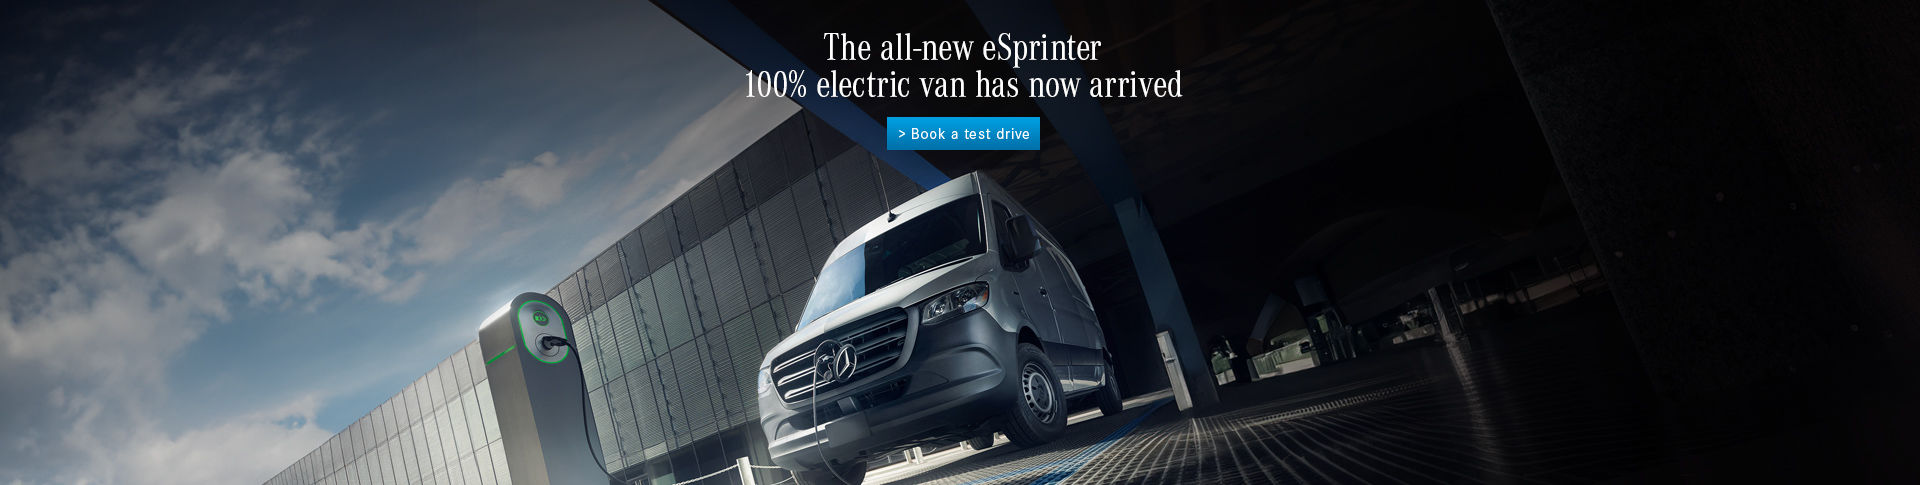 The all-new eSprinter 100% electric van has now arrived